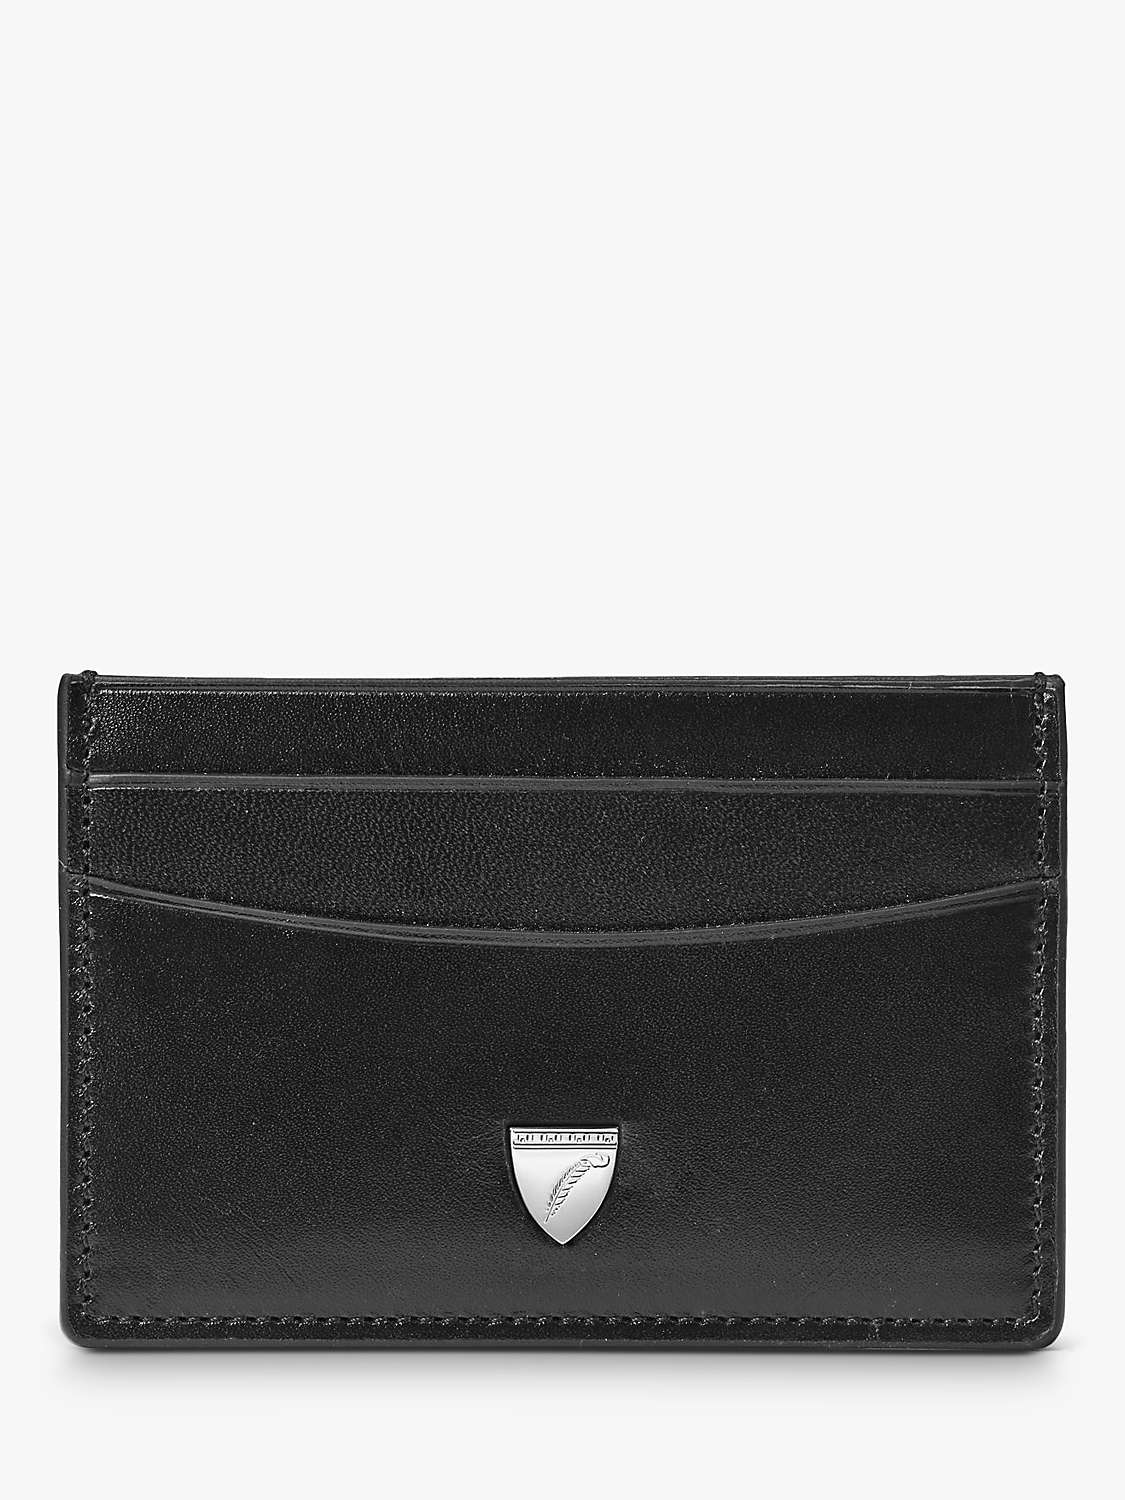 Buy Aspinal of London Smooth Leather Slim Credit Card Case Online at johnlewis.com